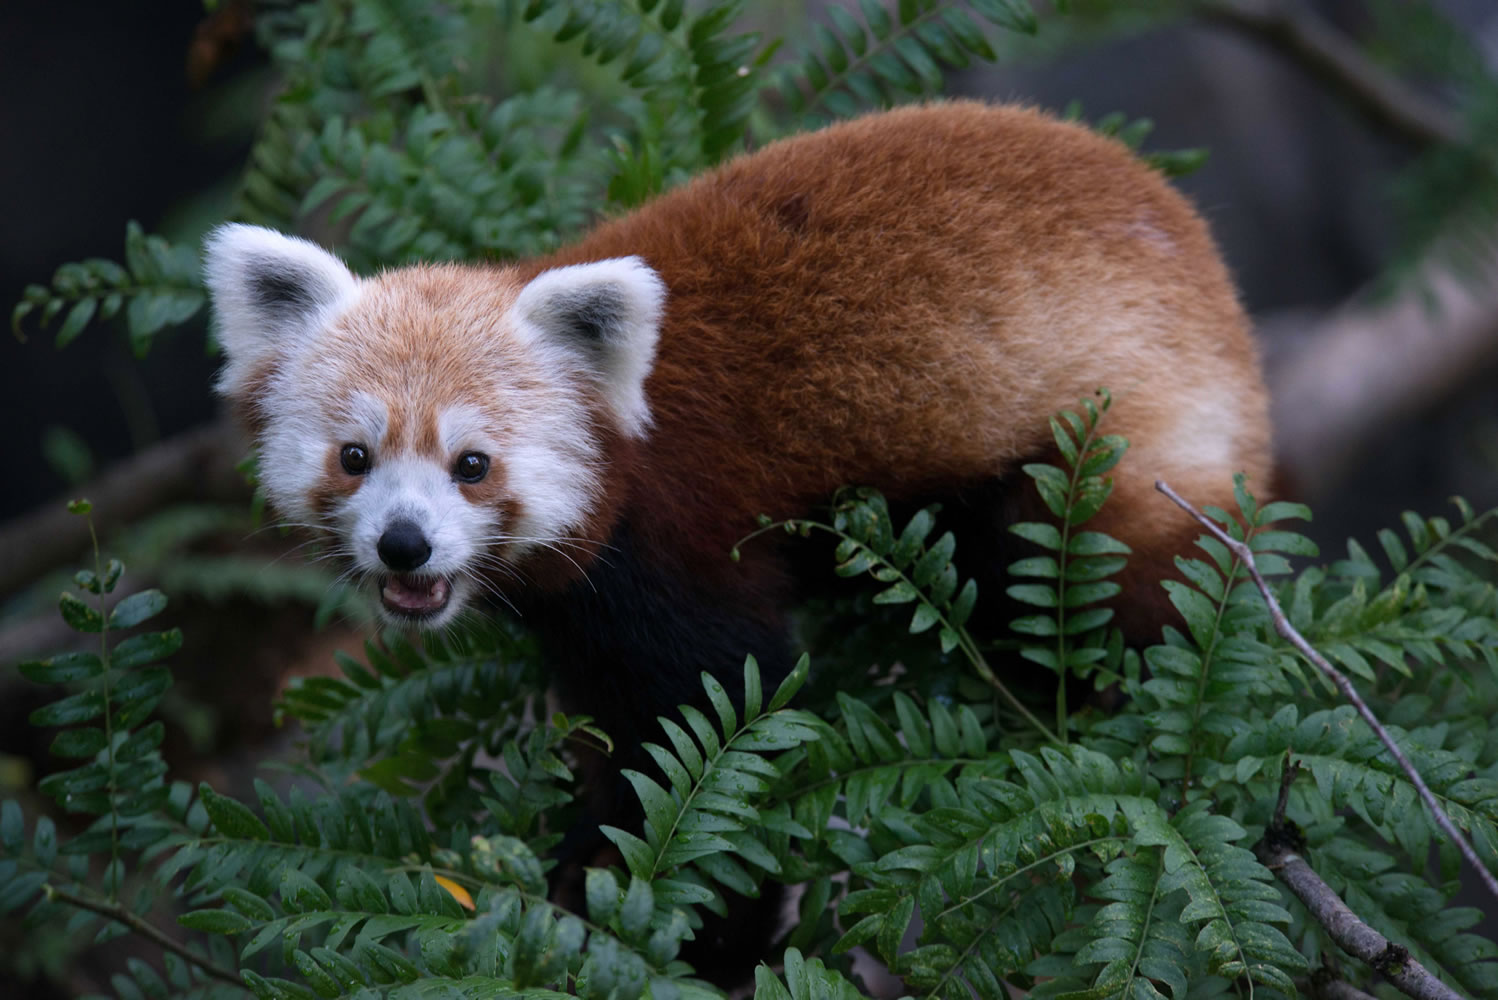 The red panda that escaped from its enclosure at the zoo in Washington in June 2013 and was later found in a nearby neighborhood.